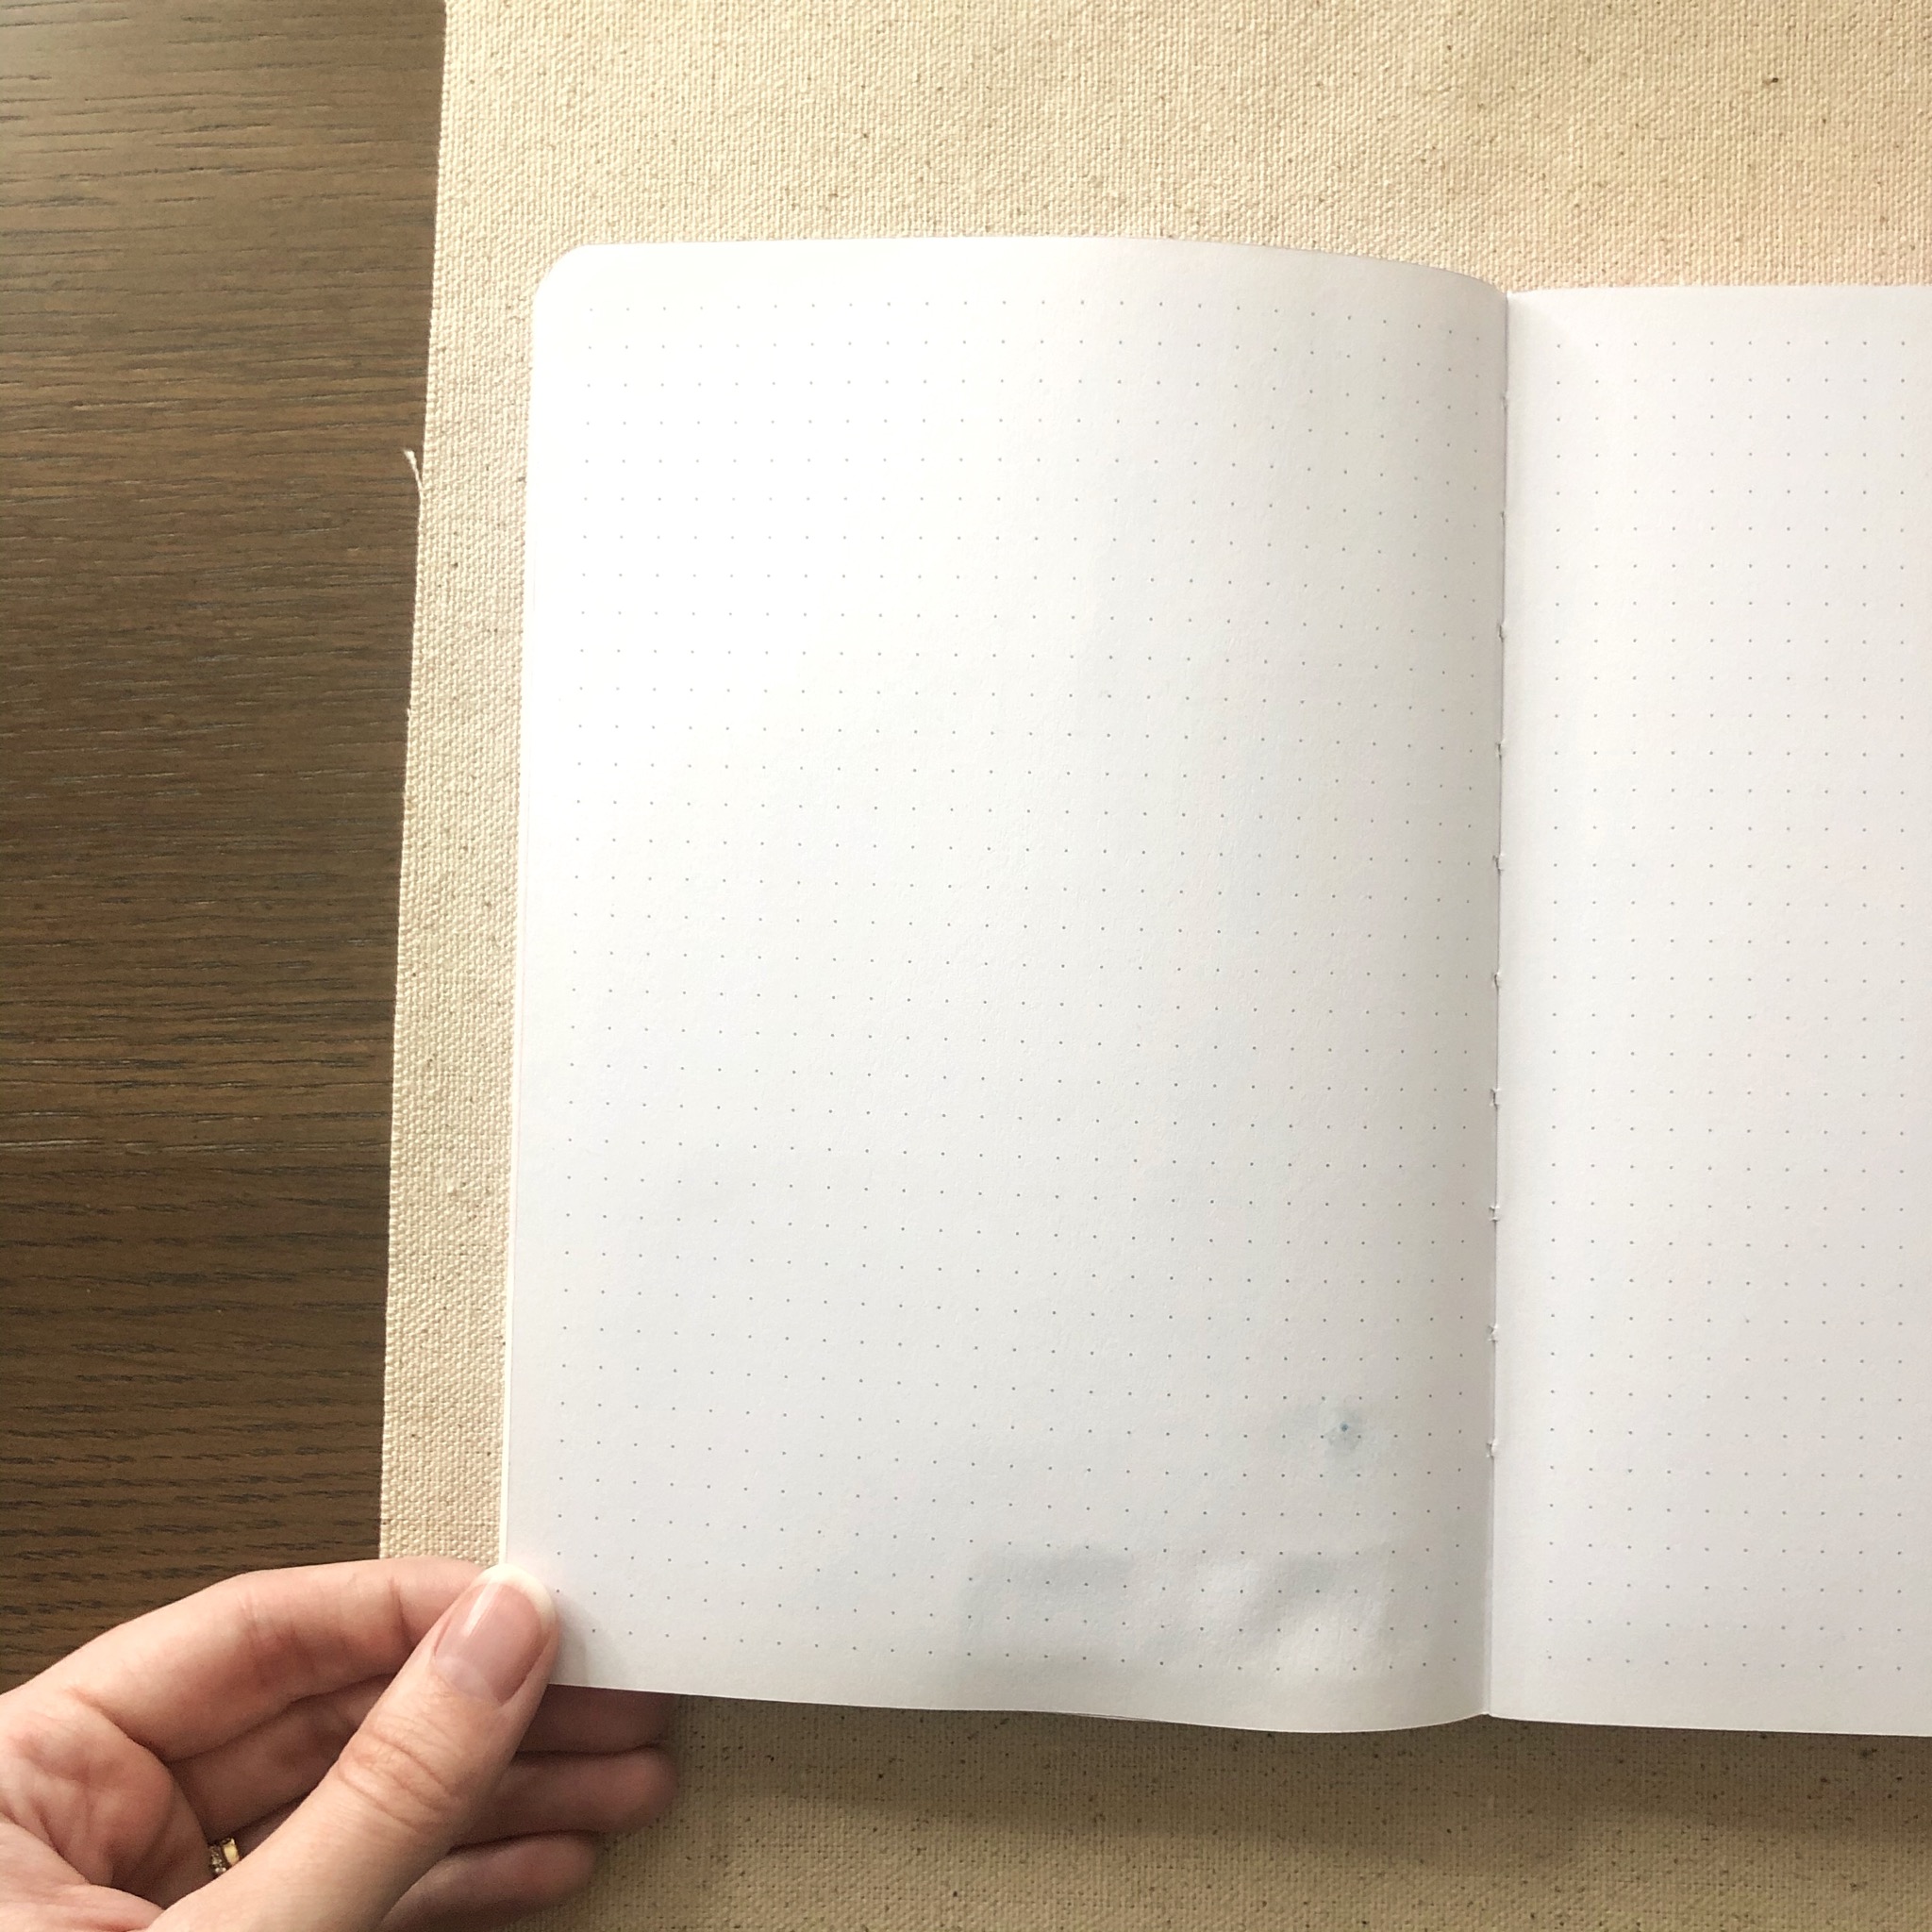 Notebook Check 2020 - Which notebook is right for your Bullet Journal?